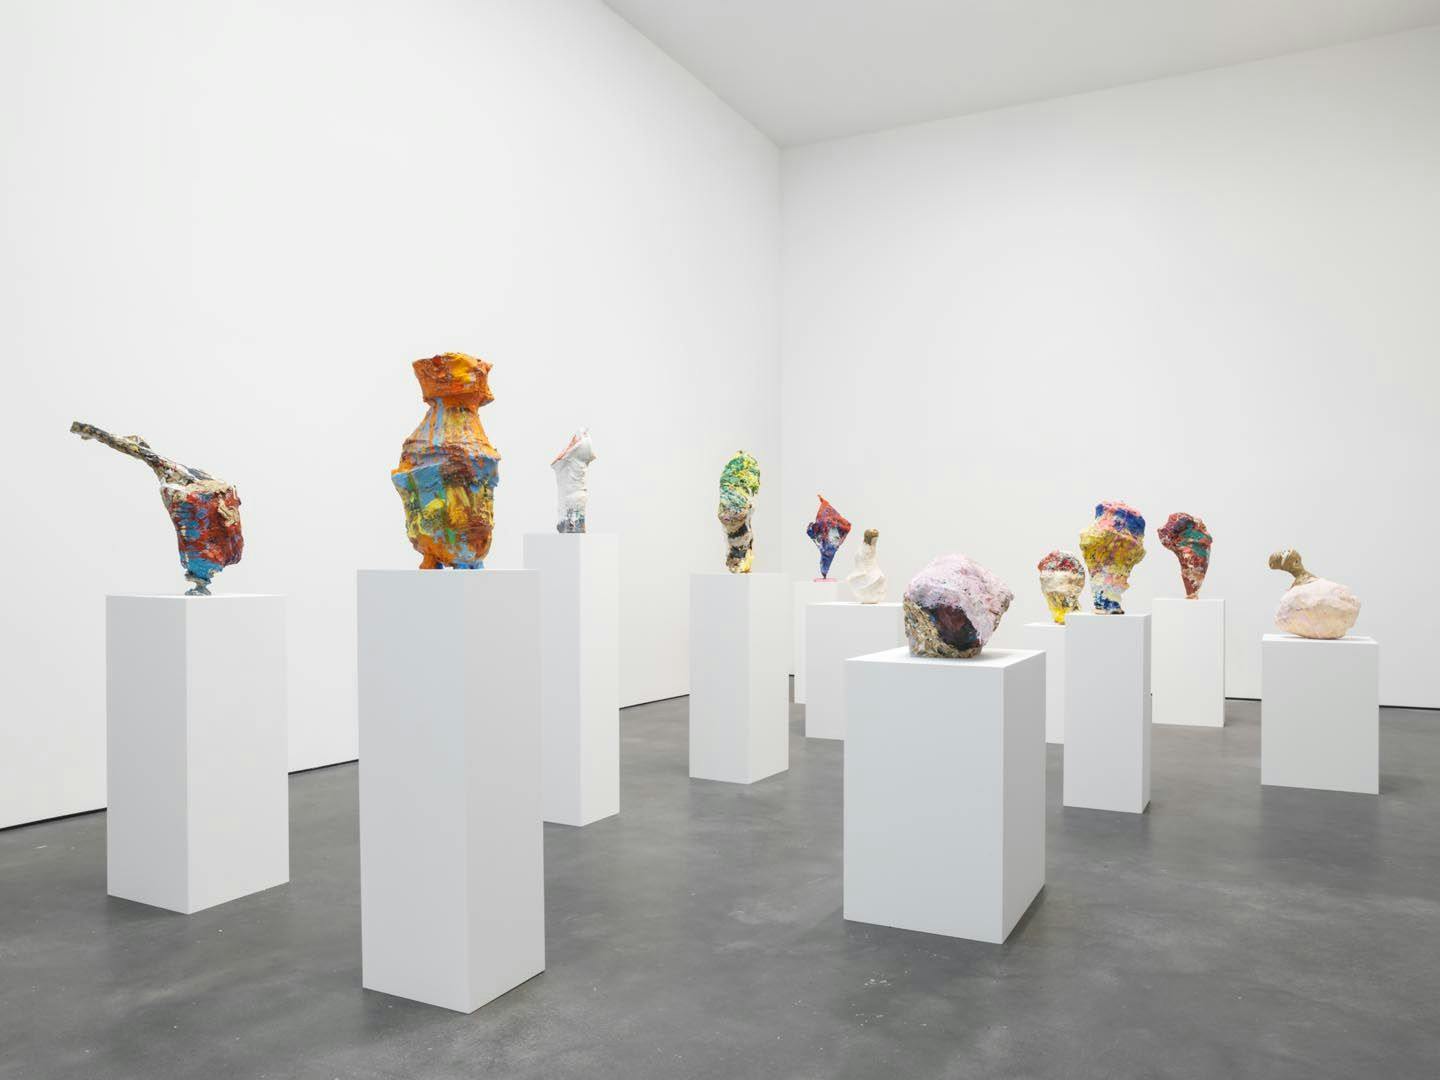 An installation view of the exhibition Franz West, at David Zwirner New York, dated 2014.